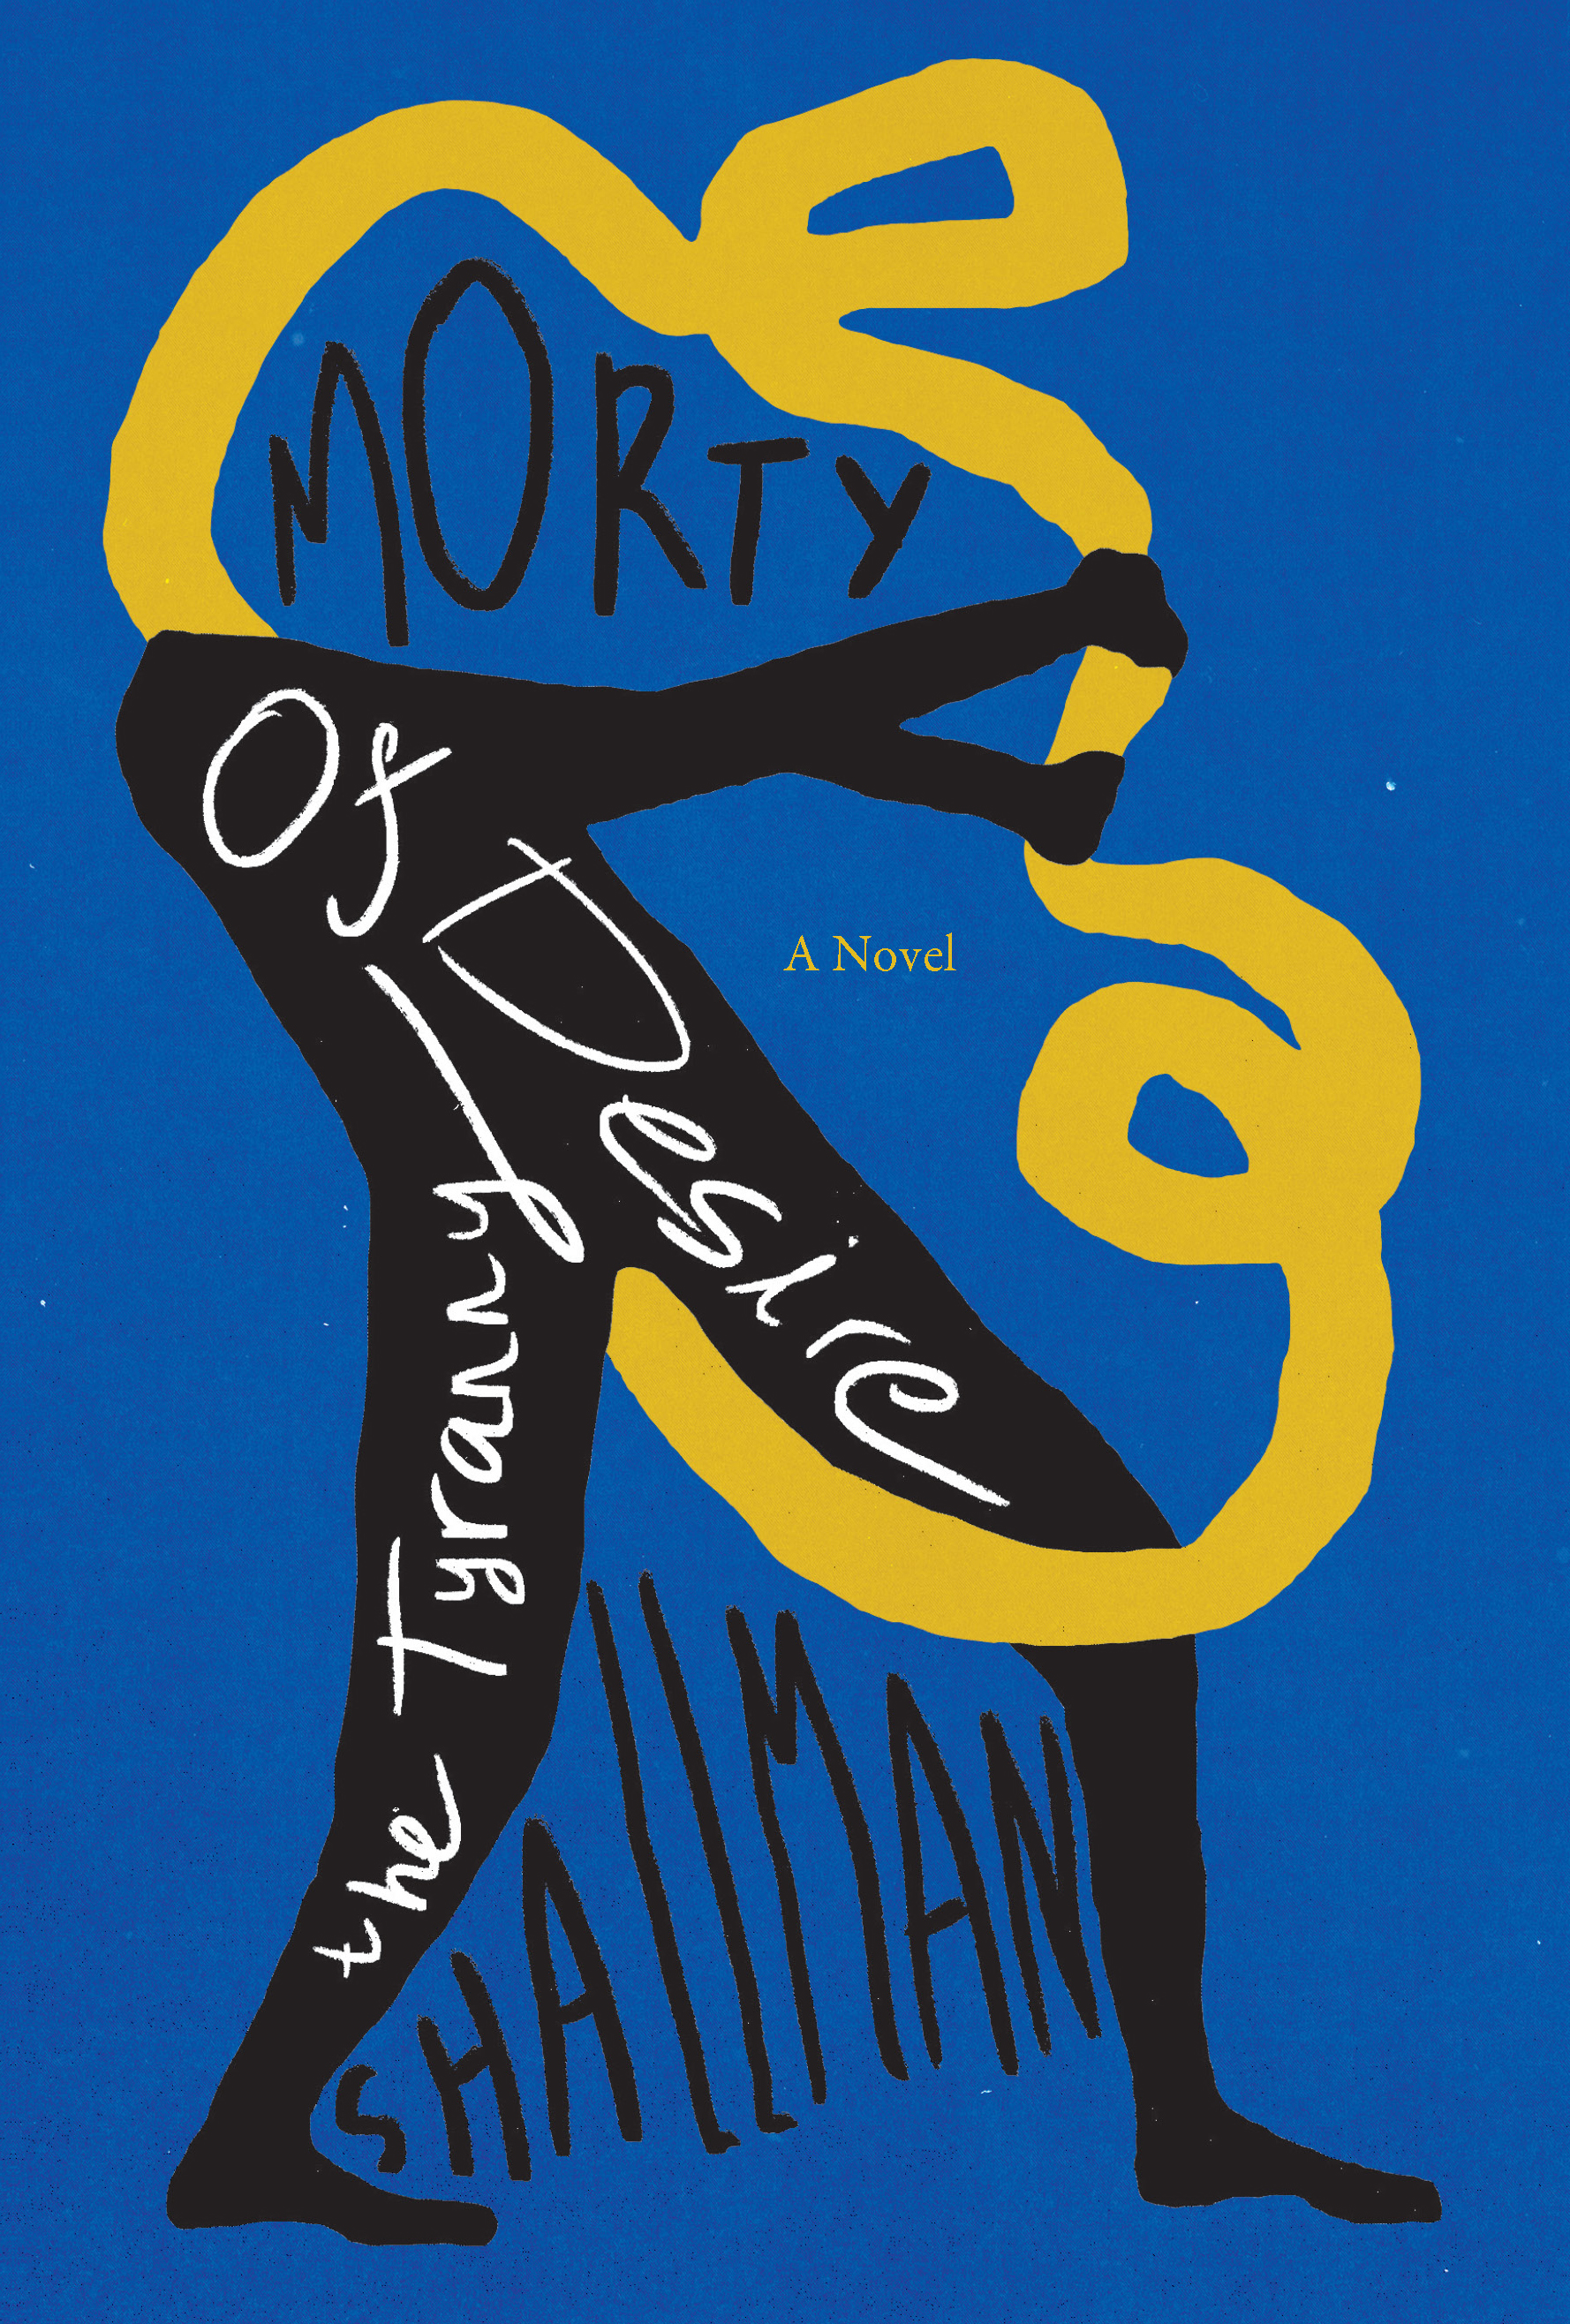 Cover Image of the Tyranny of Desire